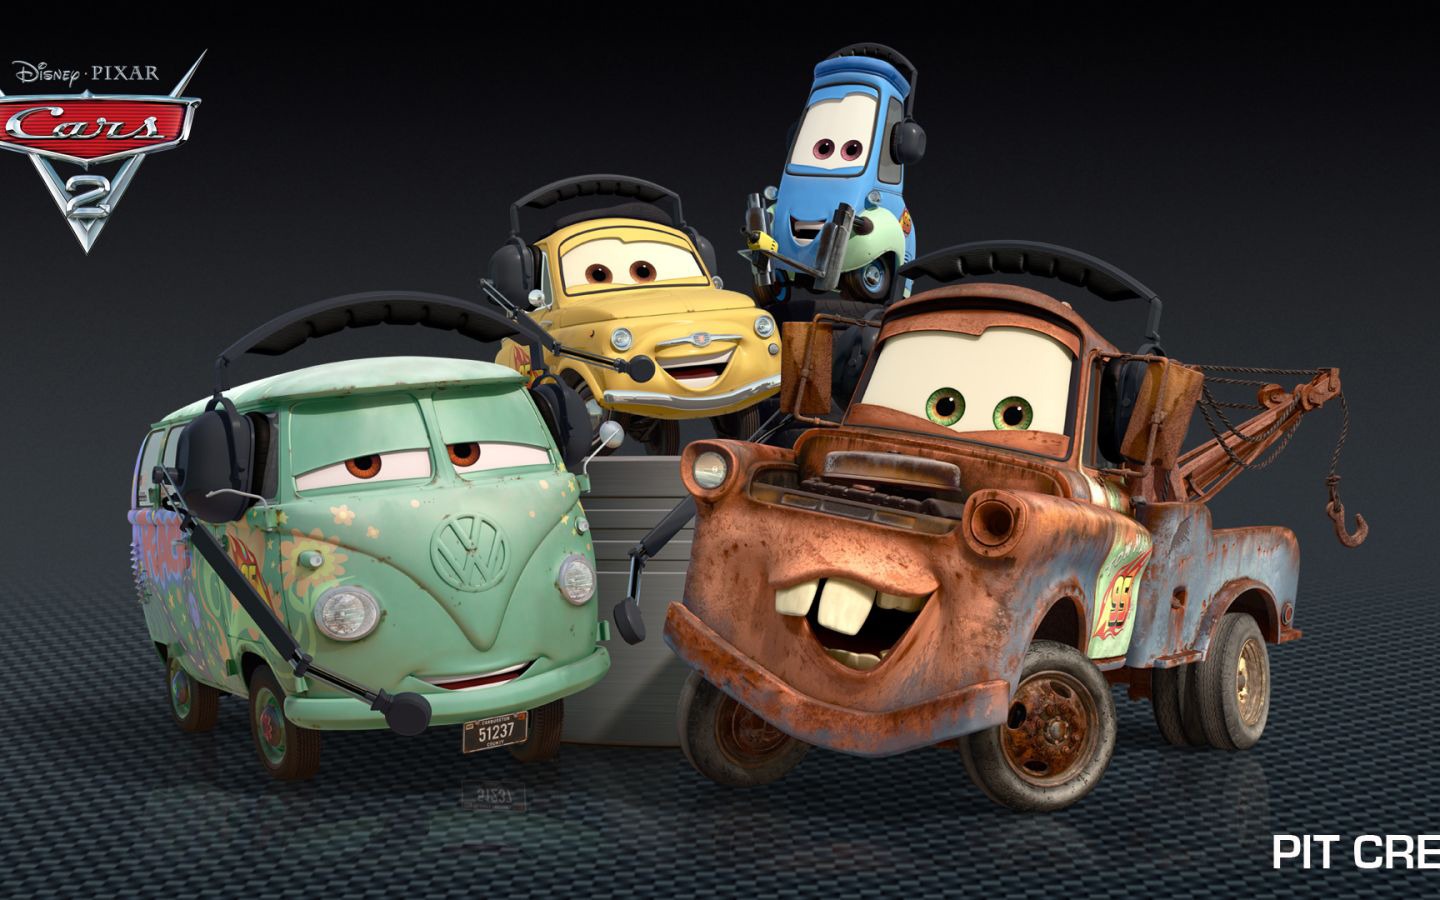 Cars 2 wallpapers #2 - 1440x900